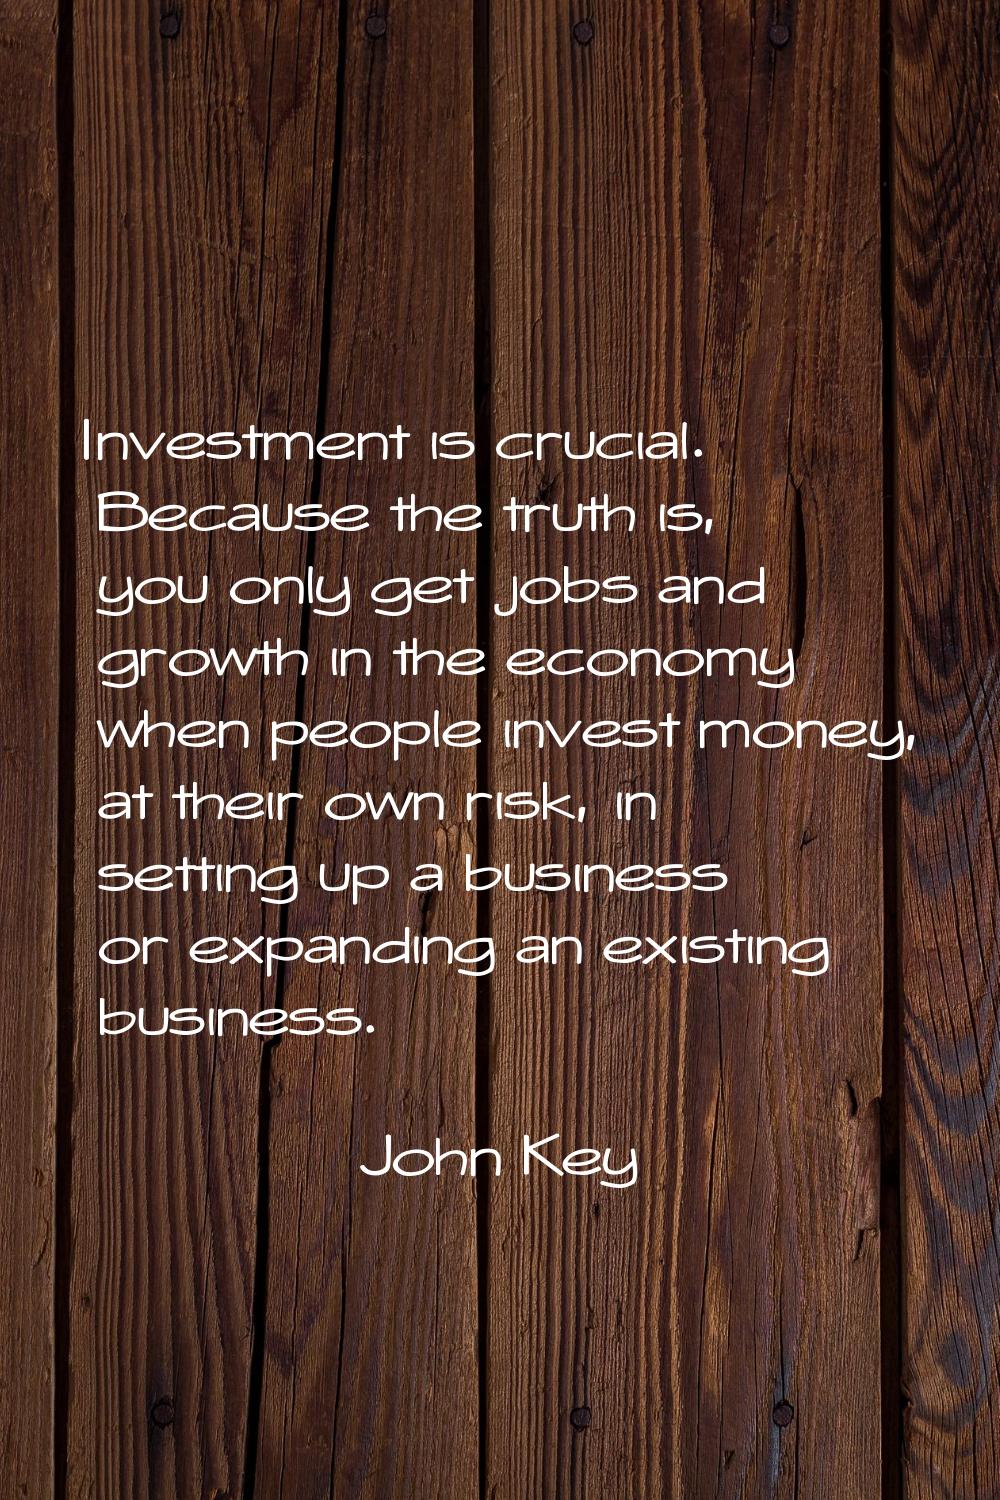 Investment is crucial. Because the truth is, you only get jobs and growth in the economy when peopl